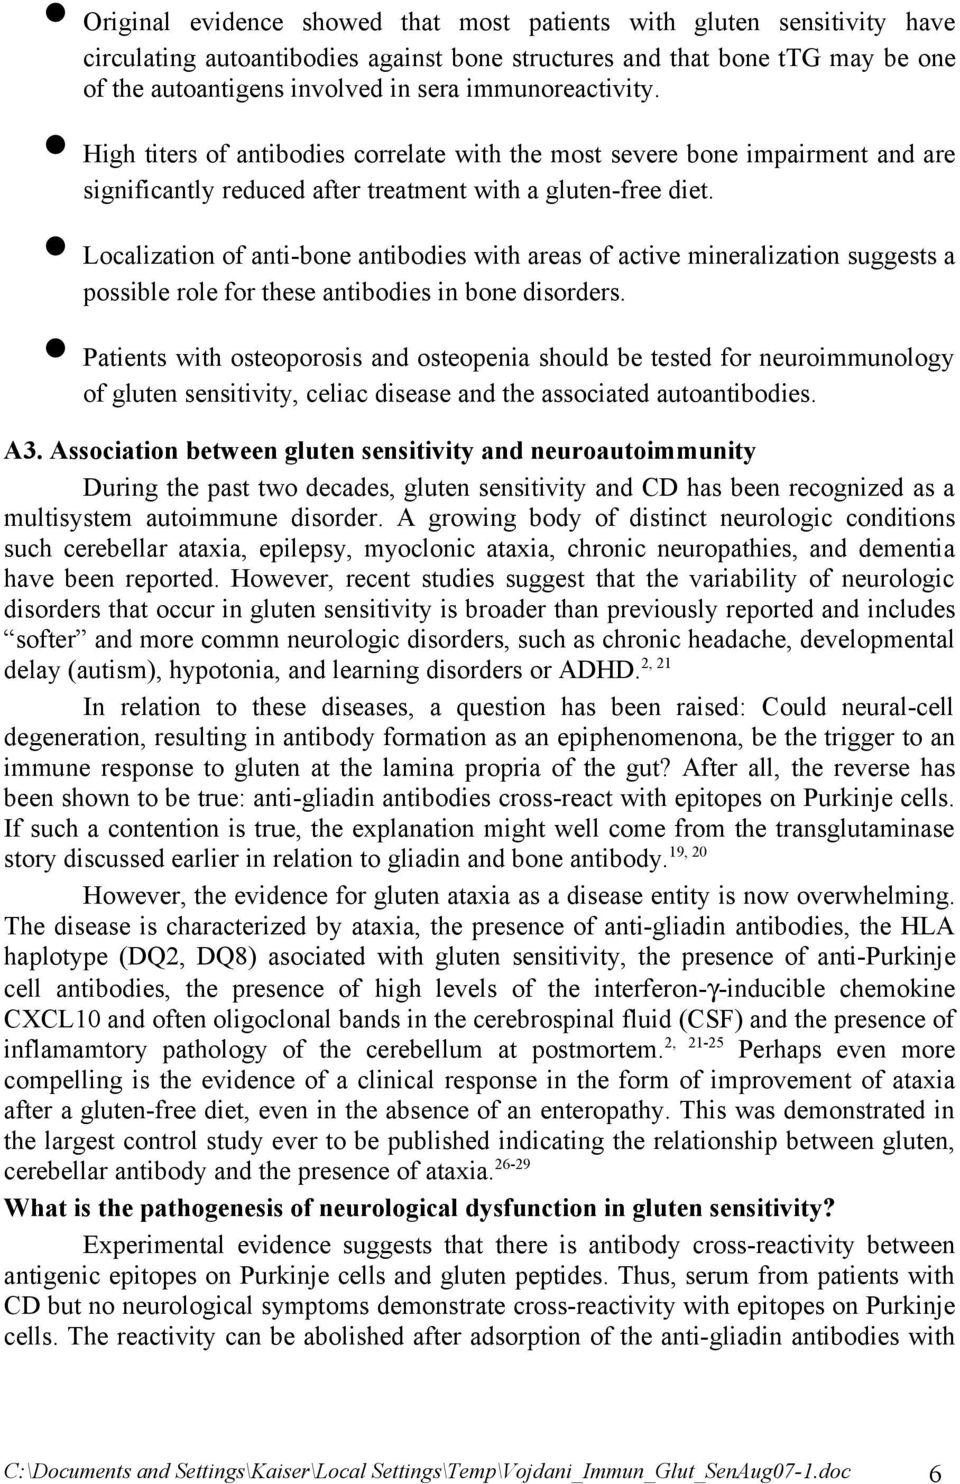 Localization of anti-bone antibodies with areas of active mineralization suggests a possible role for these antibodies in bone disorders.